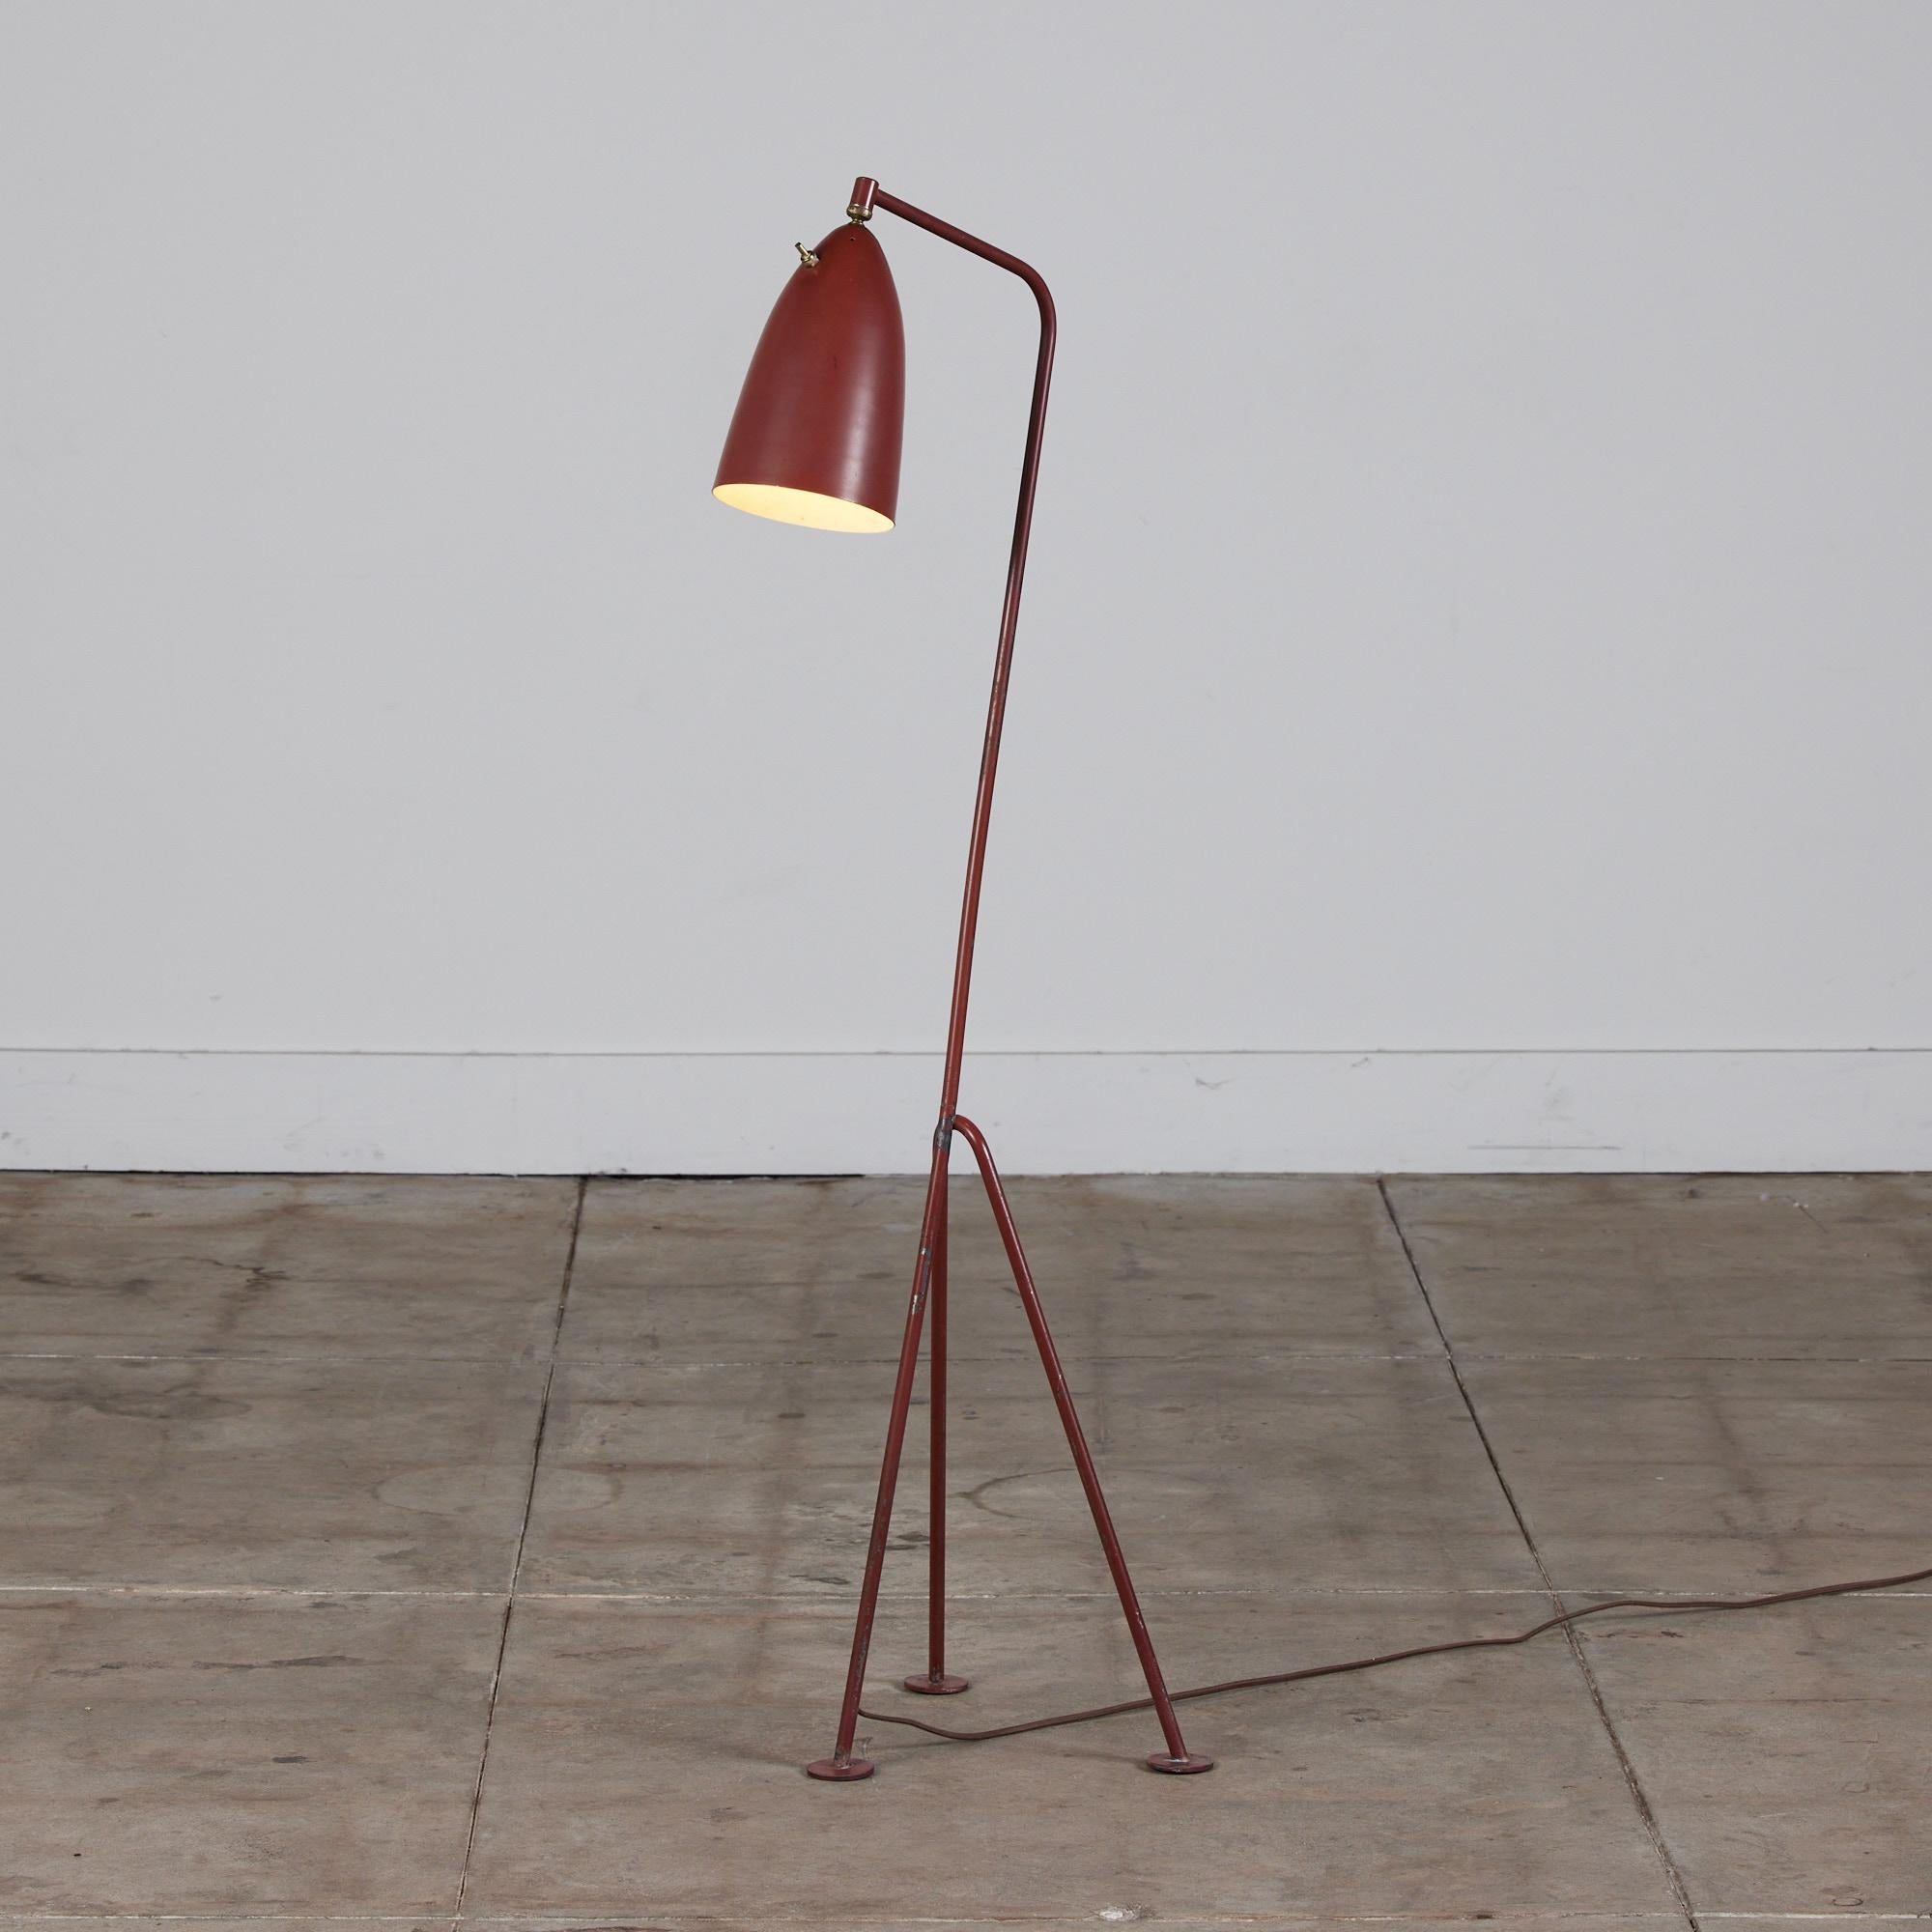 Designed by Swedish-American designer Greta Grossman for Ralph O. Smith, c.1947, USA. The lamp offers a minimalist design with a brick red enameled metal body. The cone shaped spun aluminum shade pivots allowing for directional lighting. The lamp